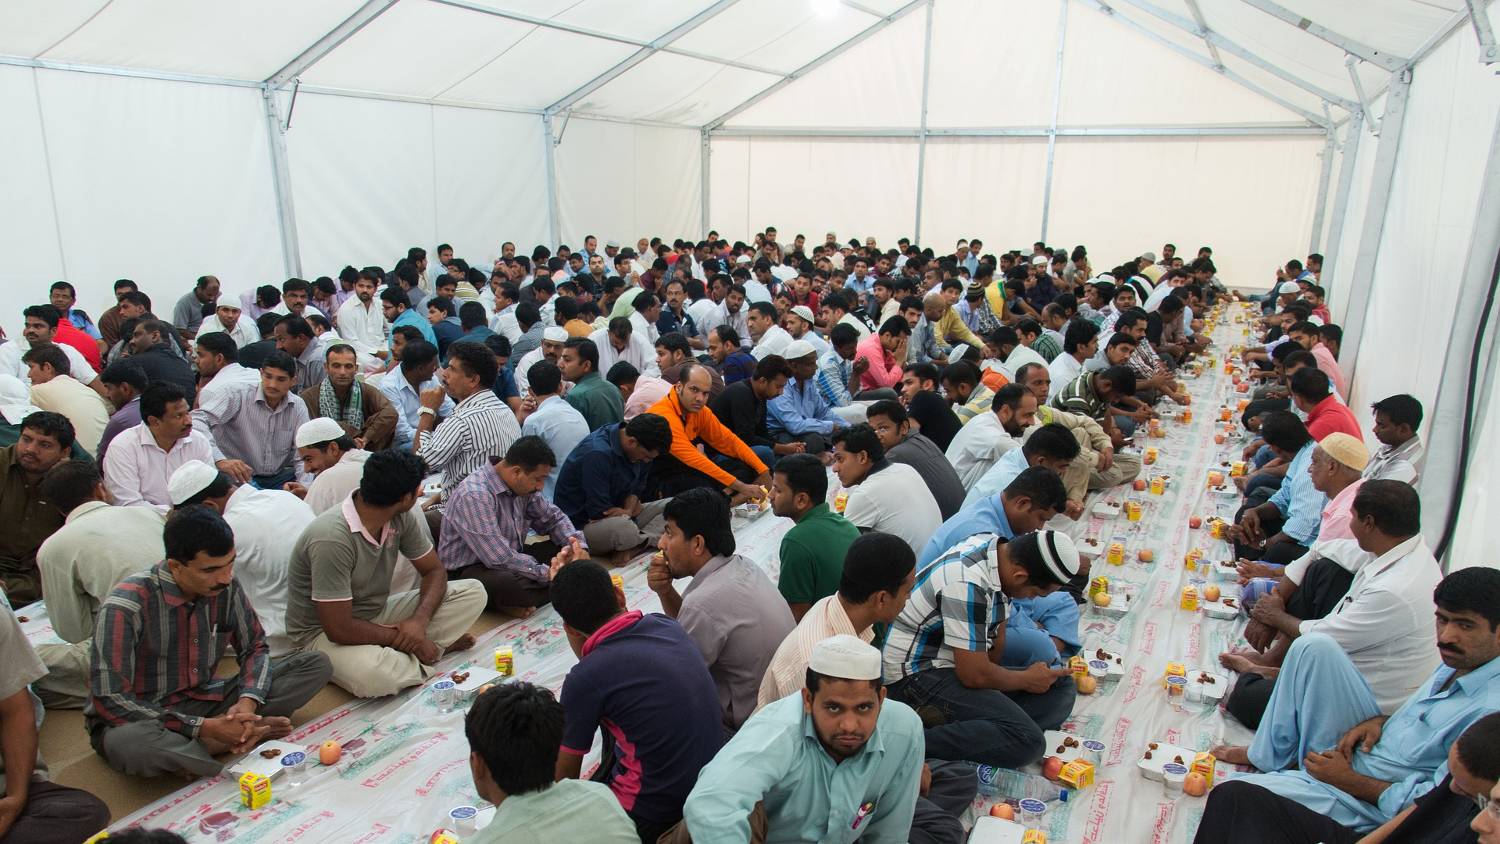 Tents are often set up in large open spaces to offer free meals to migrant workers during the month of Ramadan (CC/Ahmad Ardity)